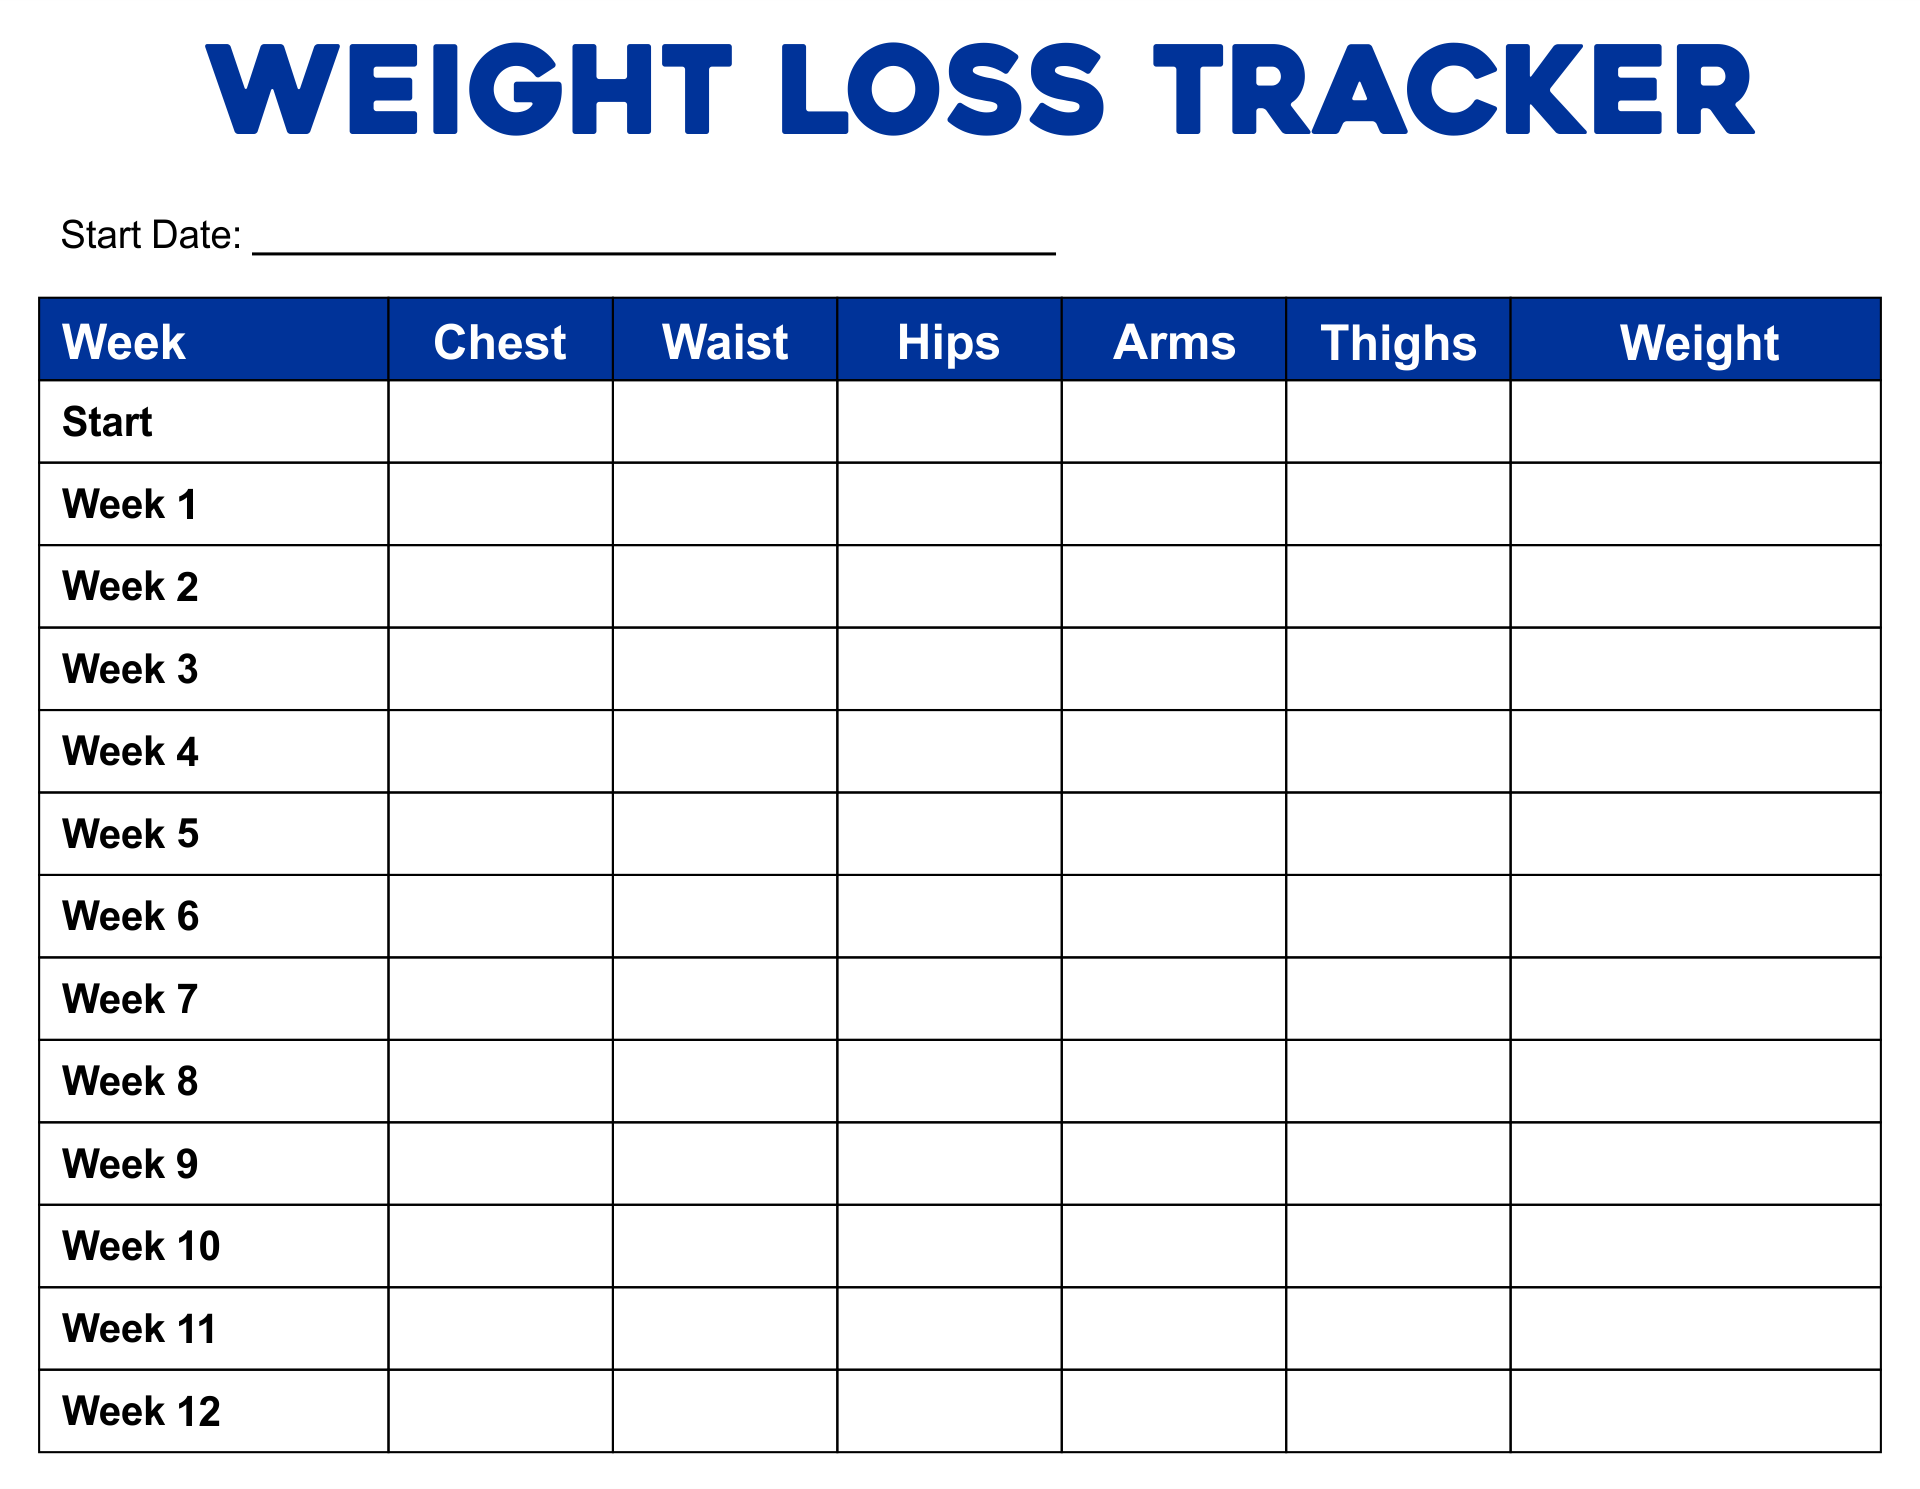 Weekly Weight Loss Tracker Printable